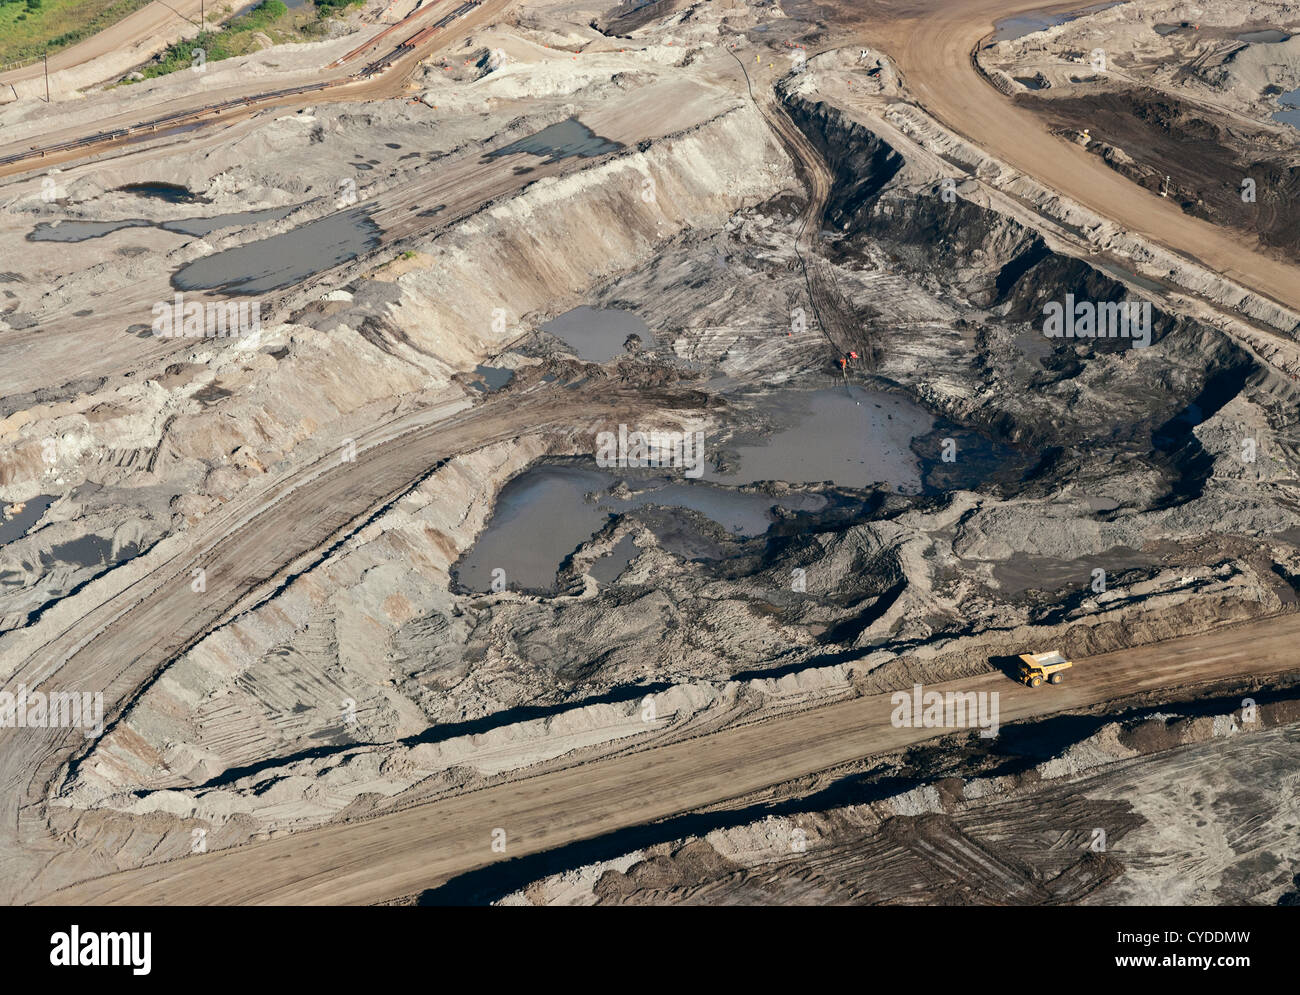 An aerial view of active bitumen open-pit mining in the Athabasca (Alberta) oil sands, Fort McMurray, Canada. Stock Photo